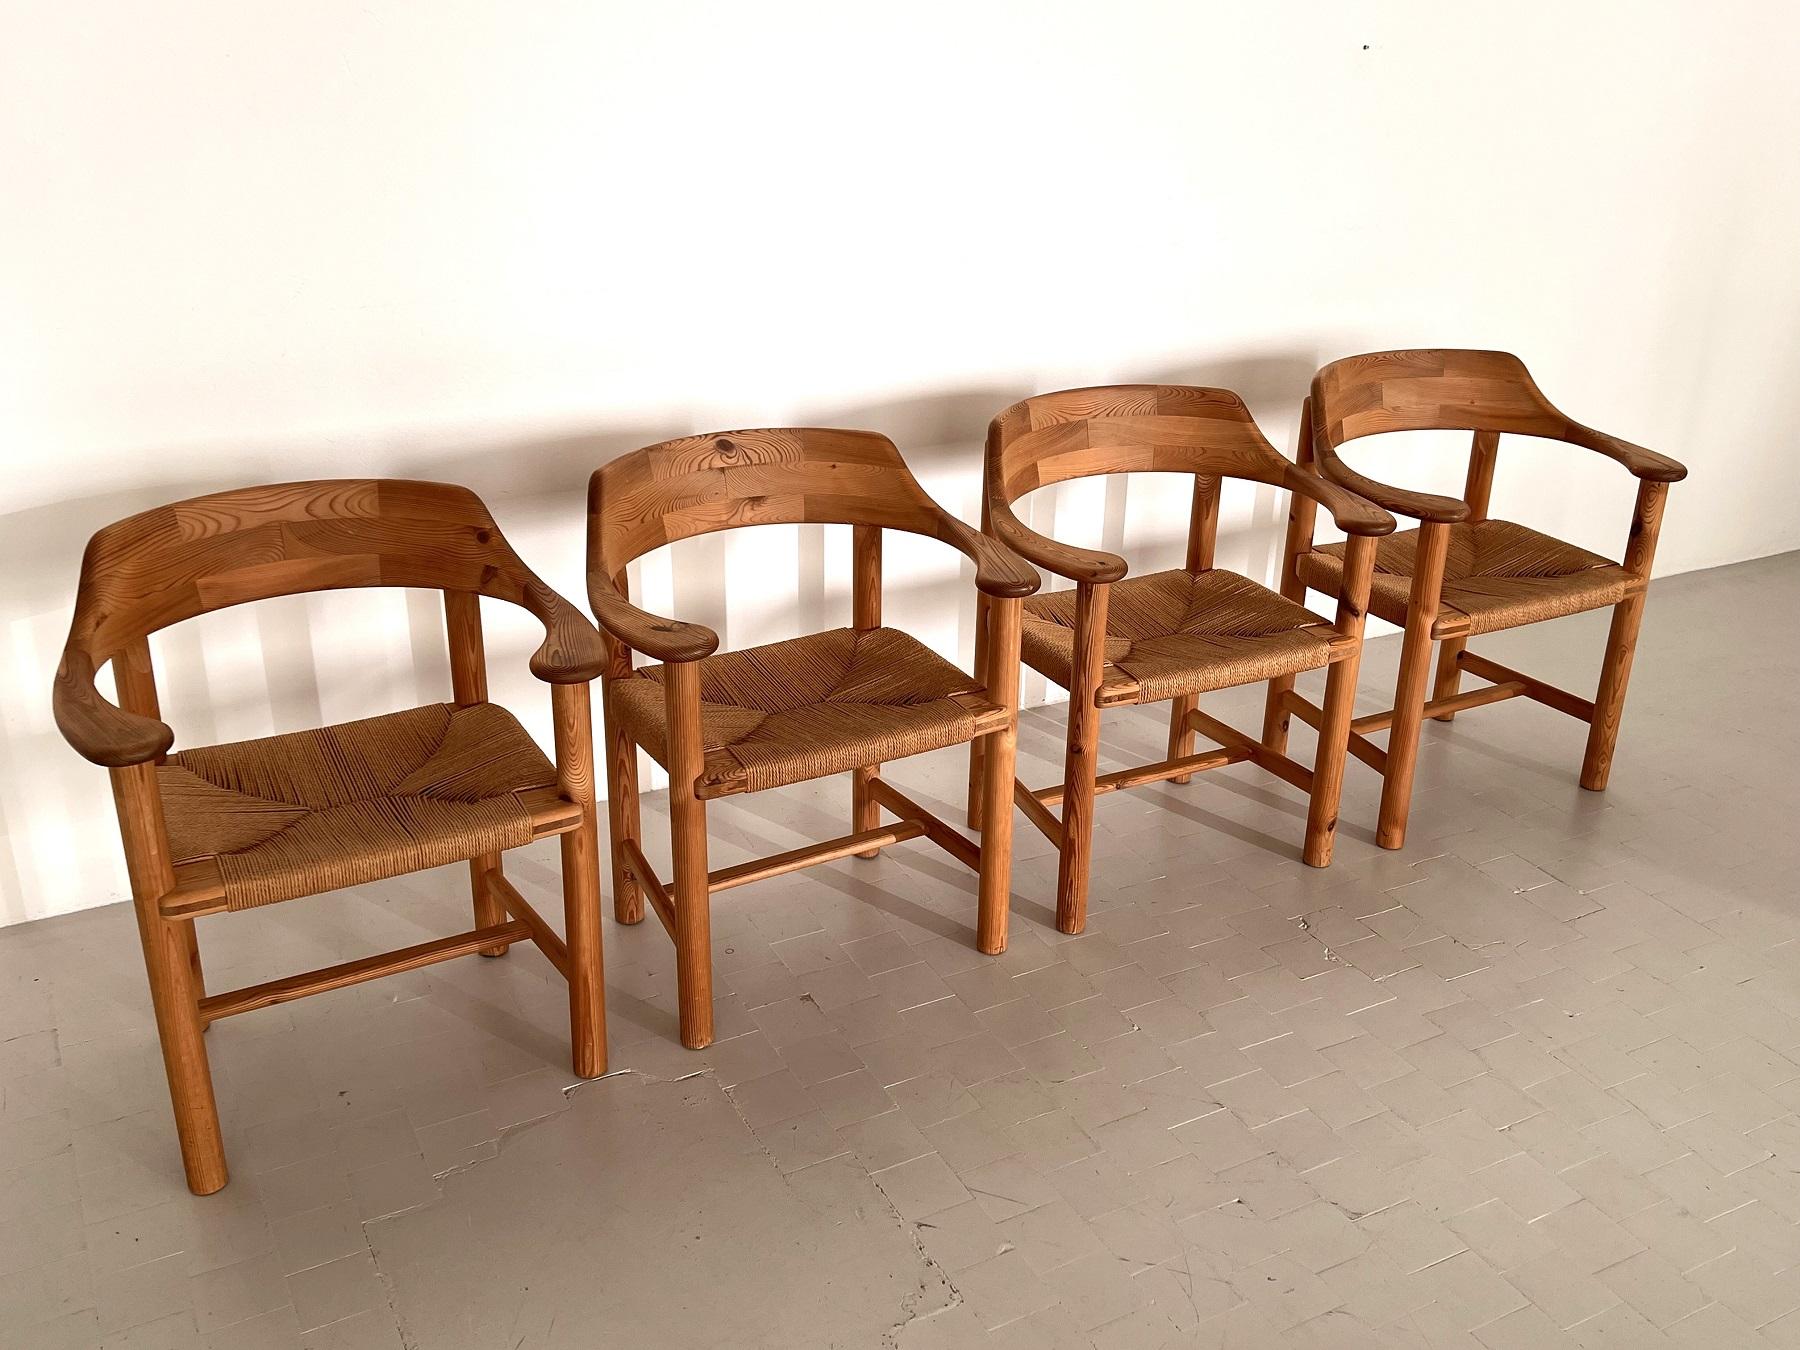 Hand-Crafted Rainer Daumiller Dining Chairs in Pine and Paper Cord, 1970s For Sale